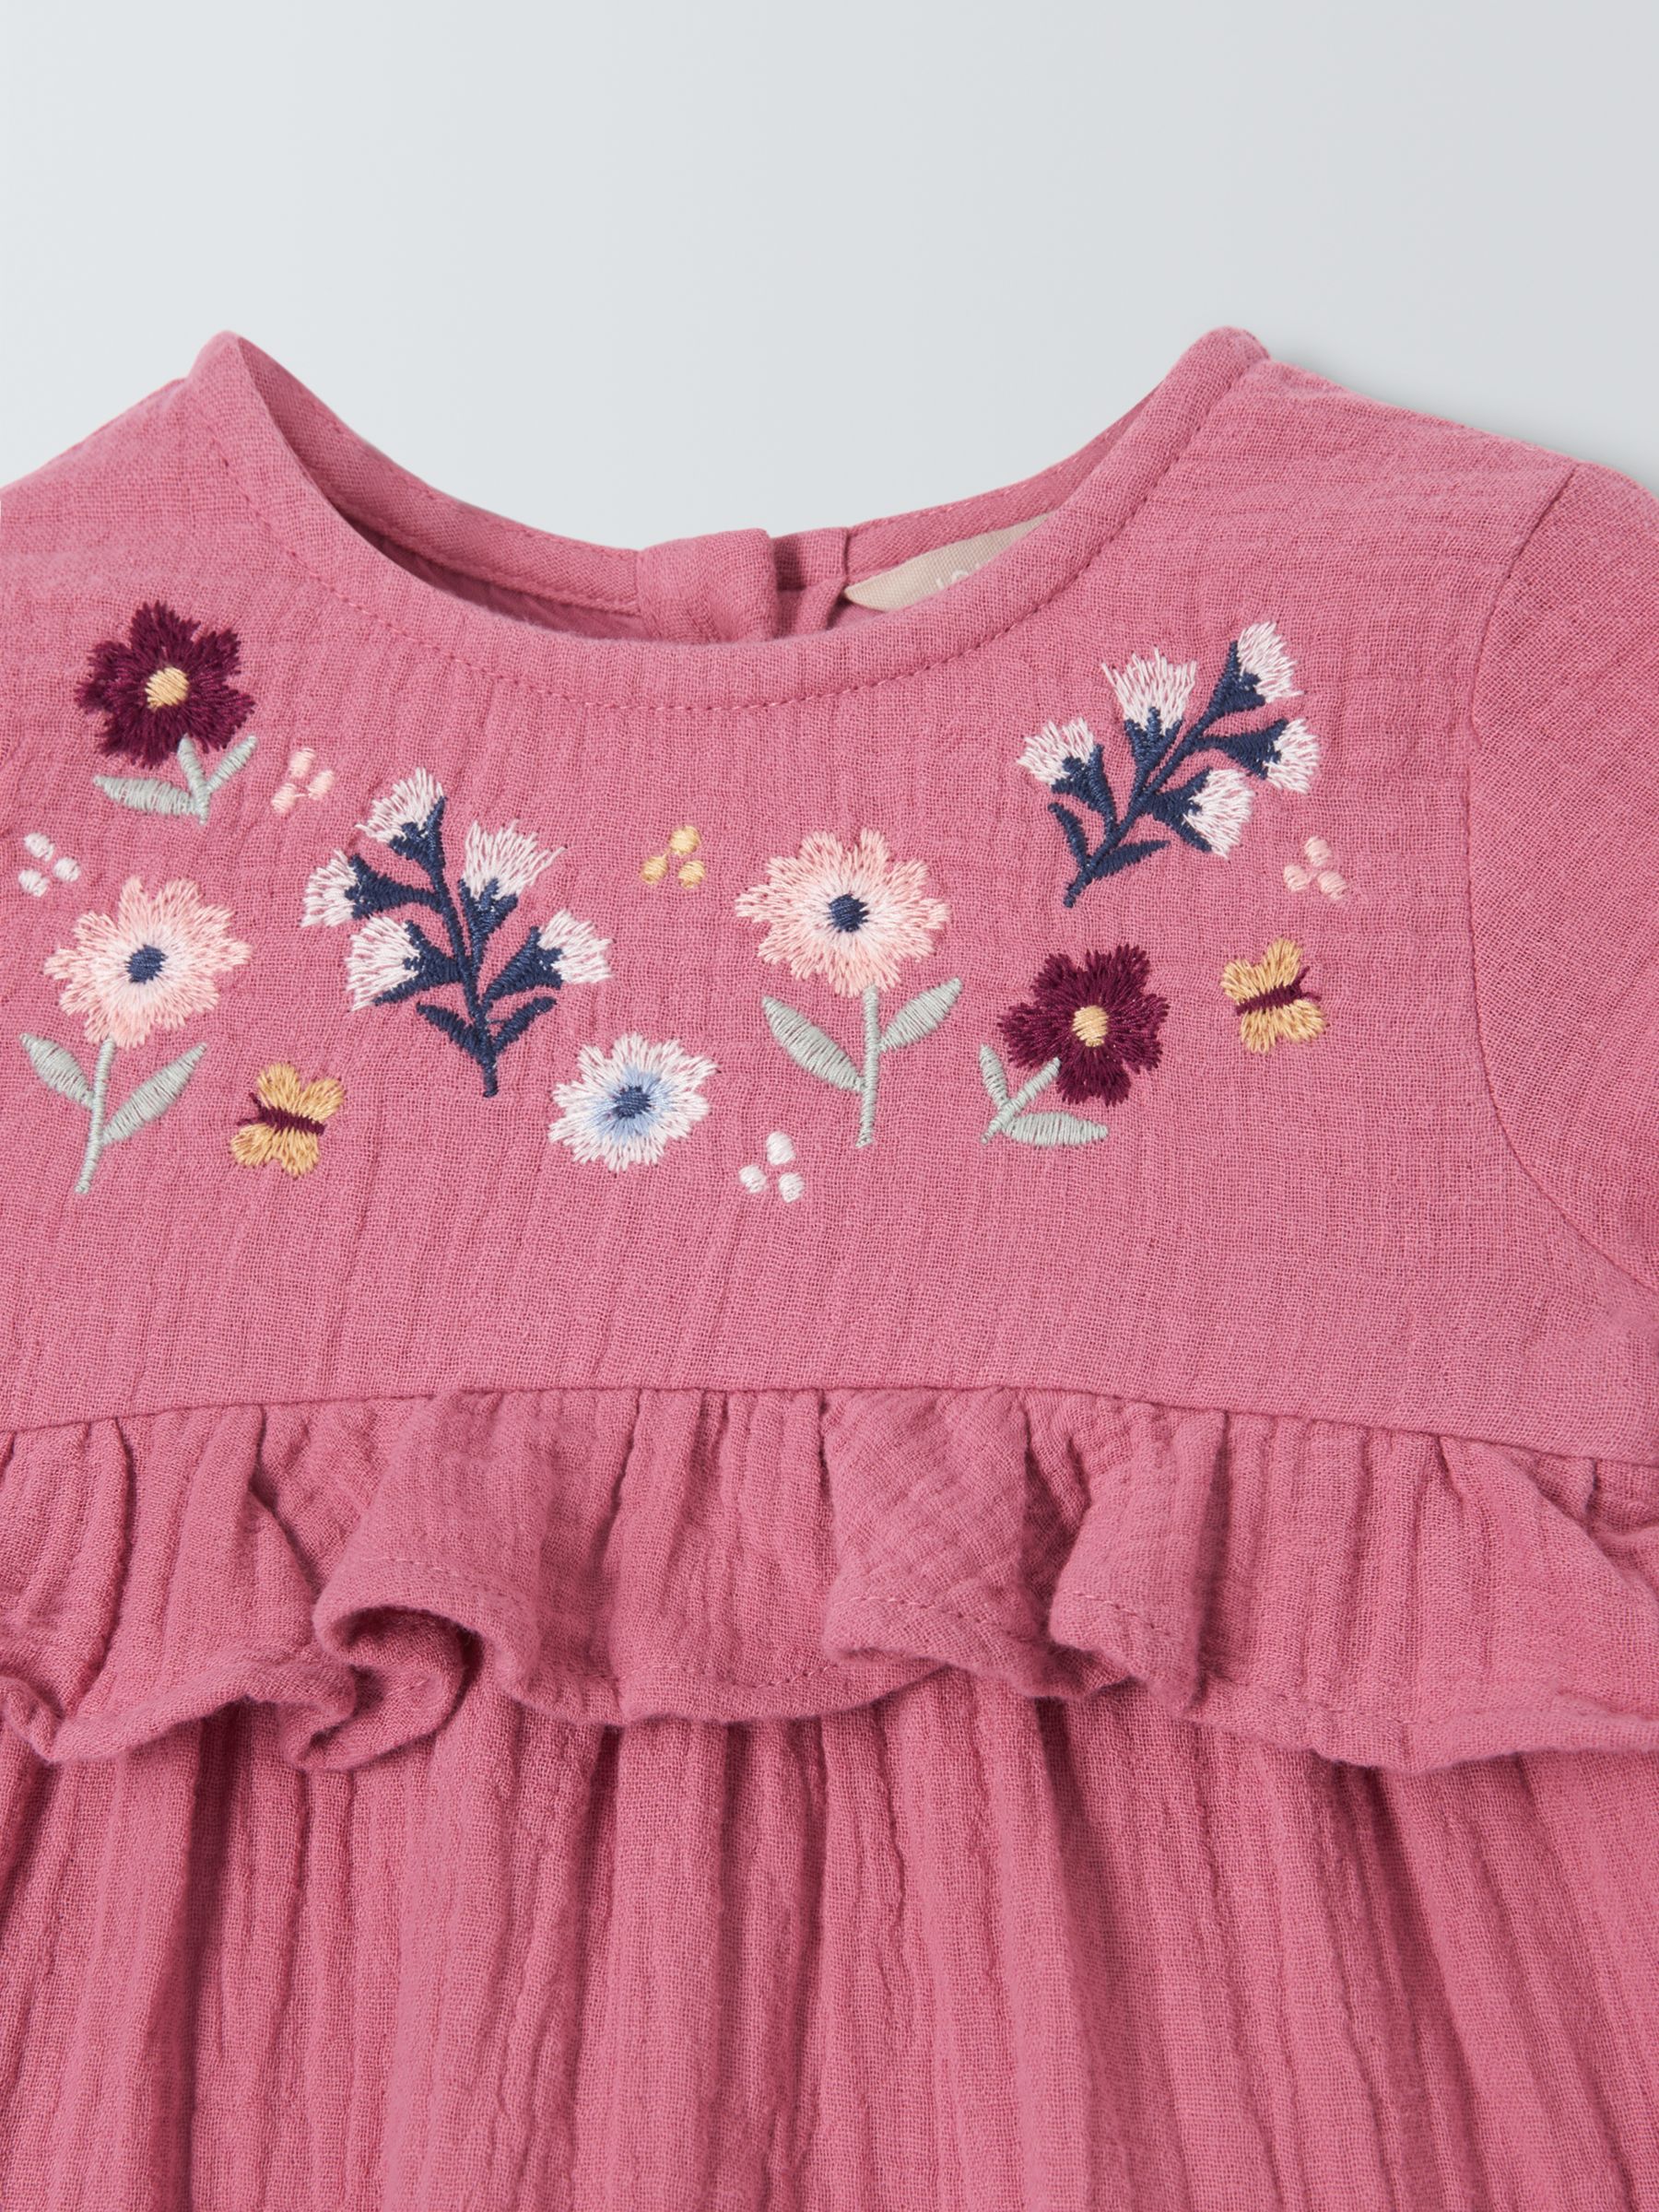 John Lewis Baby Floral Embroidered Long Sleeve Dress, Pink, 2-3 years